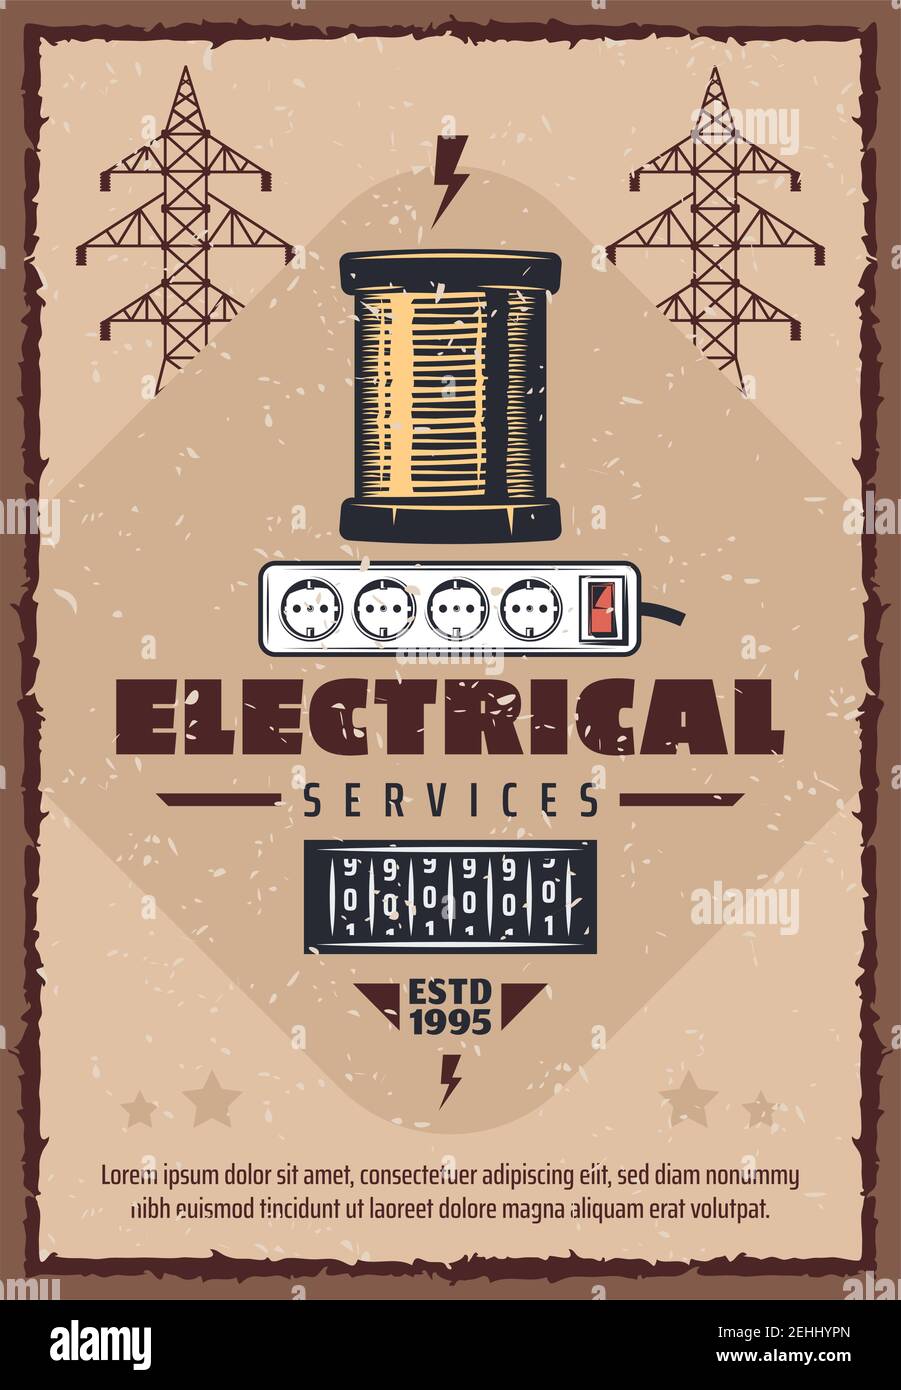 Electrical service vintage poster for electricity power and energy industry. Vector retro design of electric reel and electricity consumption gauge fo Stock Vector